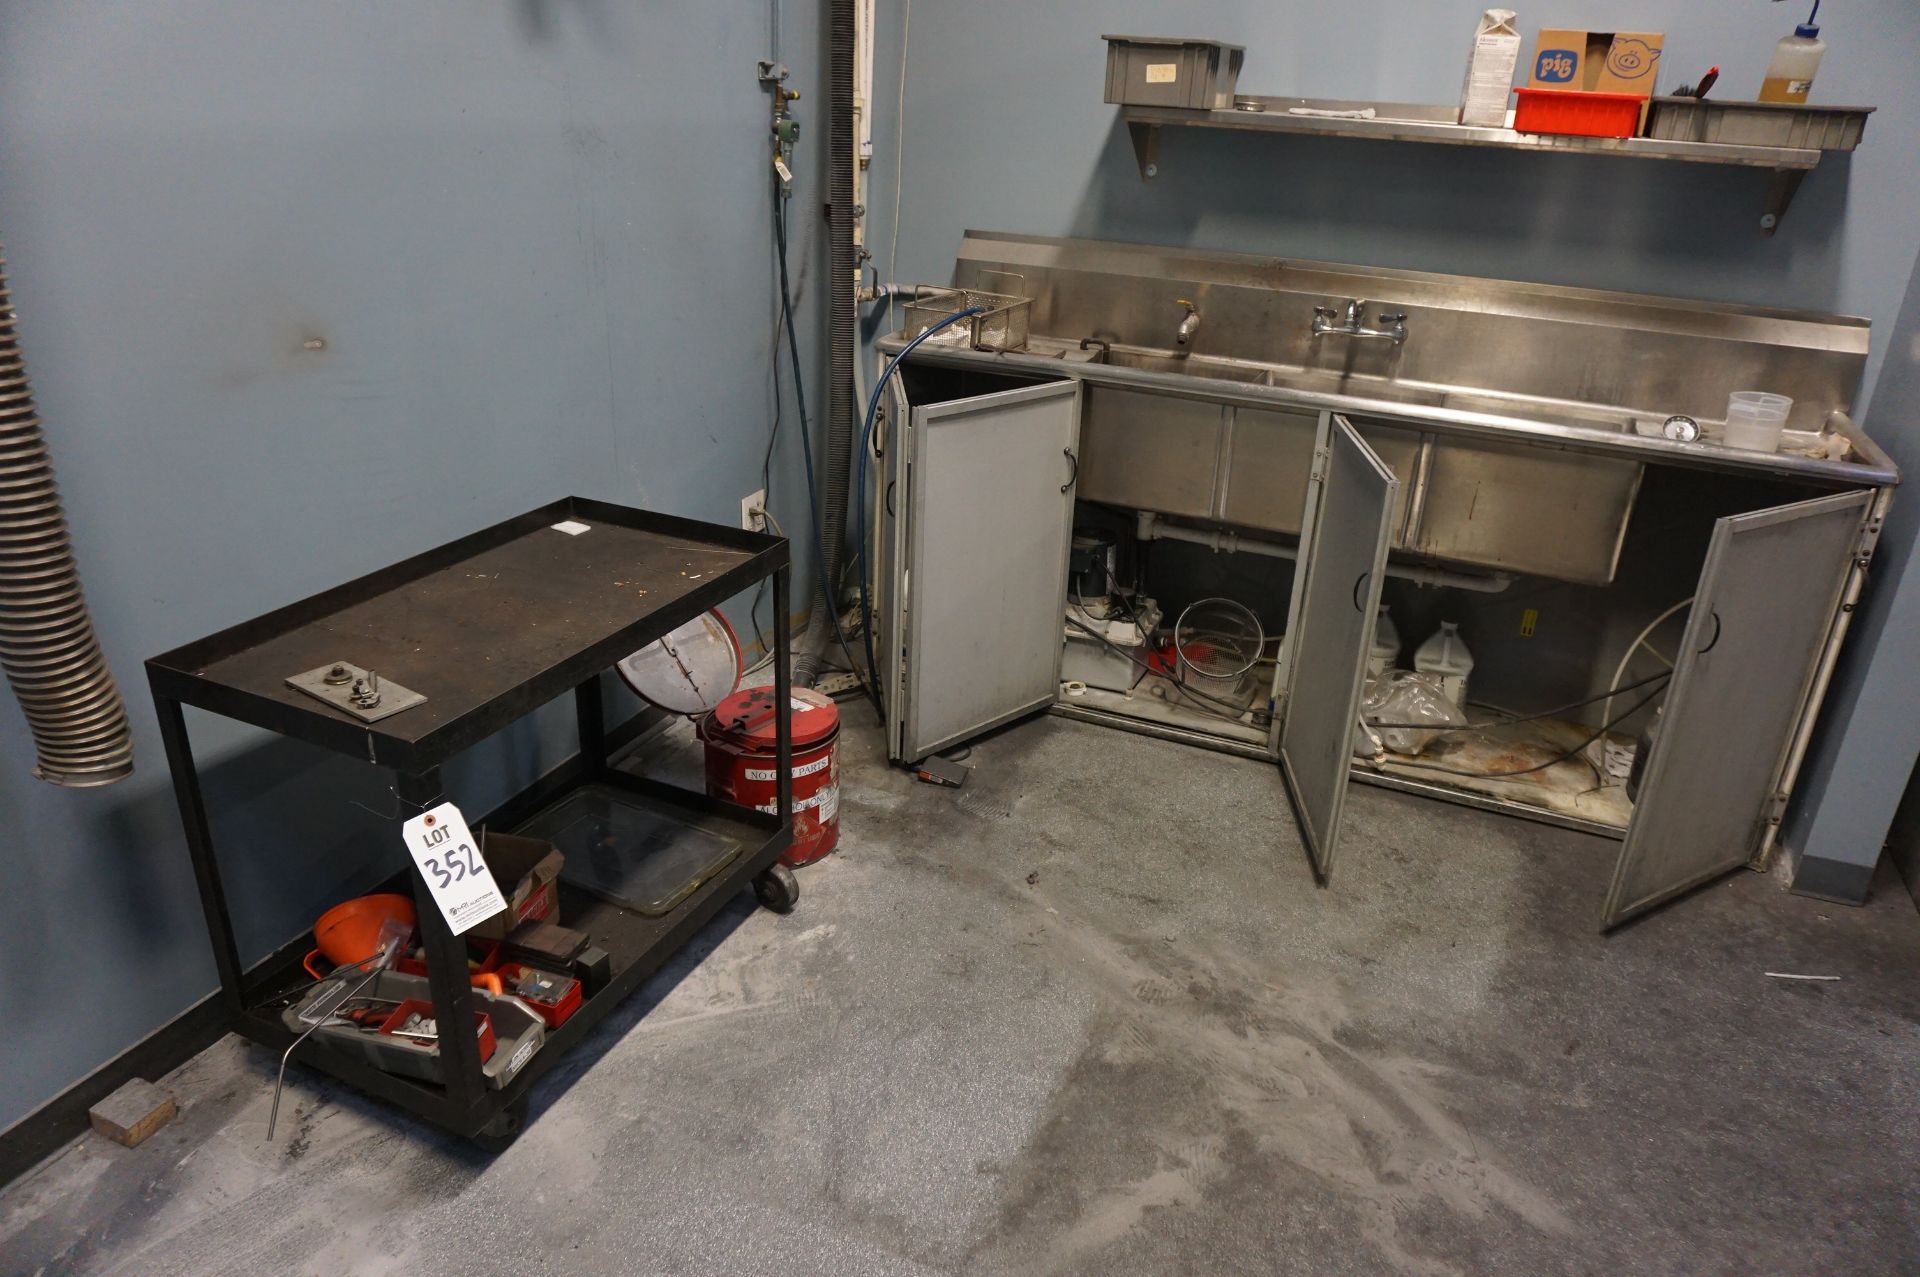 LOT TO INCLUDE: STAINLESS STEEL SINK AREA WITH CONTENTS, STAINLESS STEEL BENCH, FILE CABINET, - Image 6 of 6